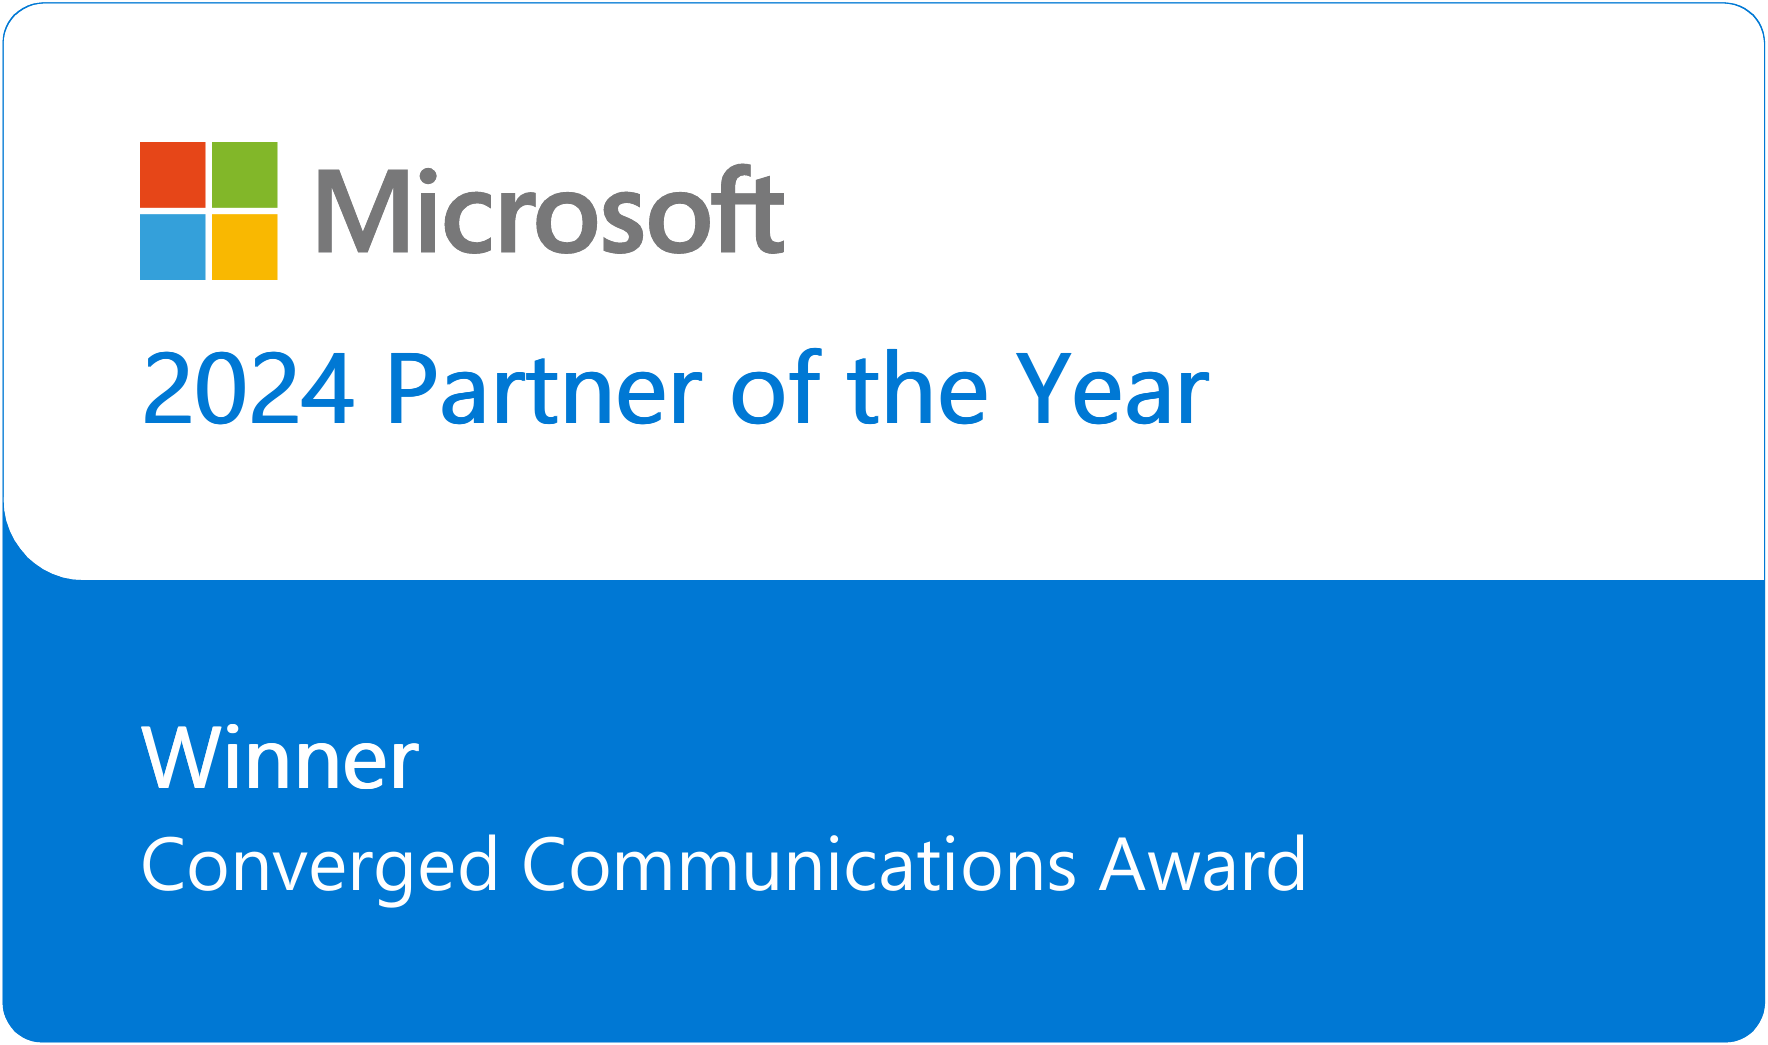 Symity wins Microsoft Partner of the Year award 2024 for Converged Communications